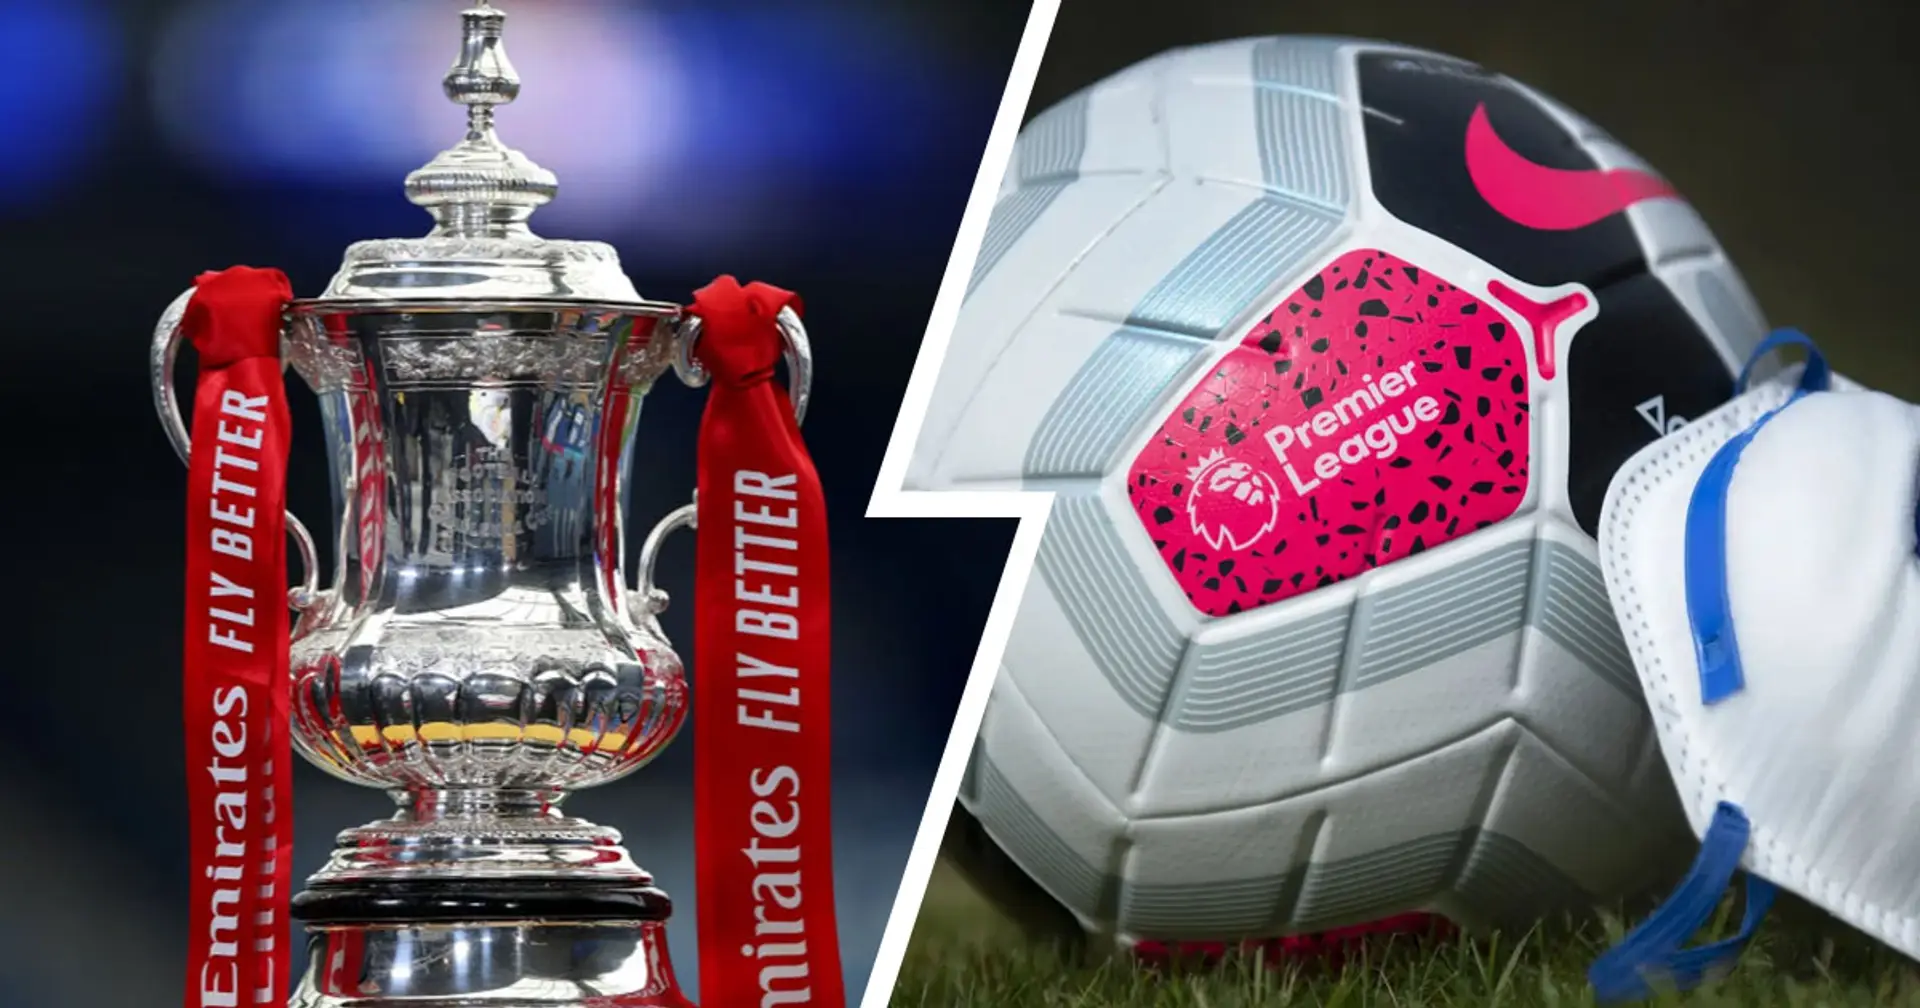 Premier League clubs told 'they must' play 3rd round FA Cup fixtures in the weekend despite Covid-19 outbreaks